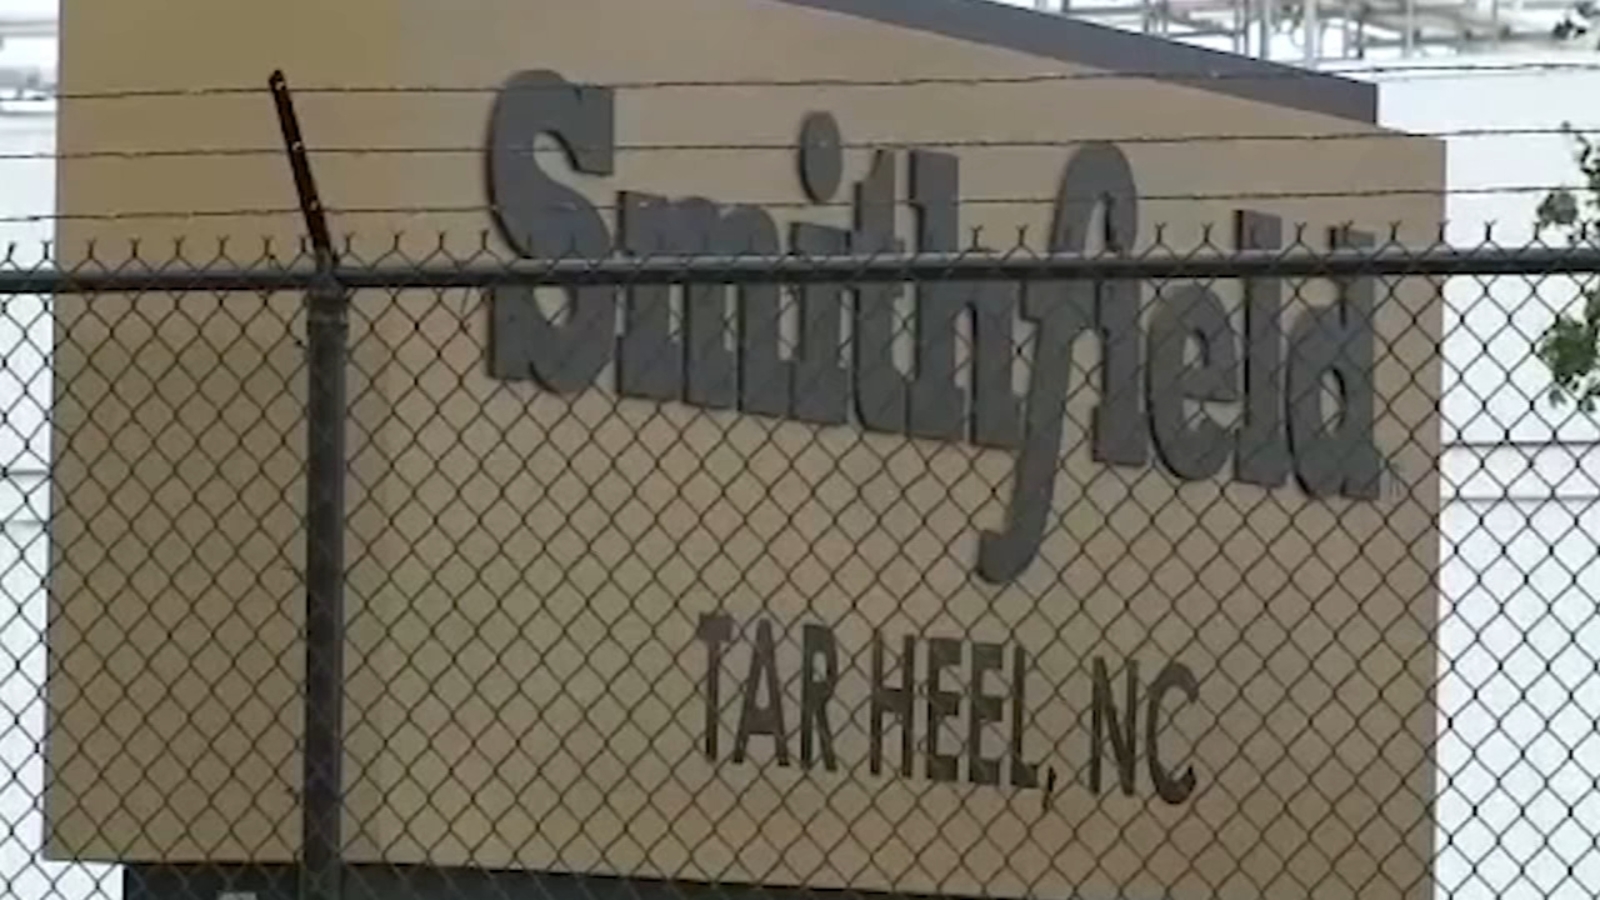 Smithfield employees worry they’ve contracted COVID-19 at North Carolina packing plant -TV